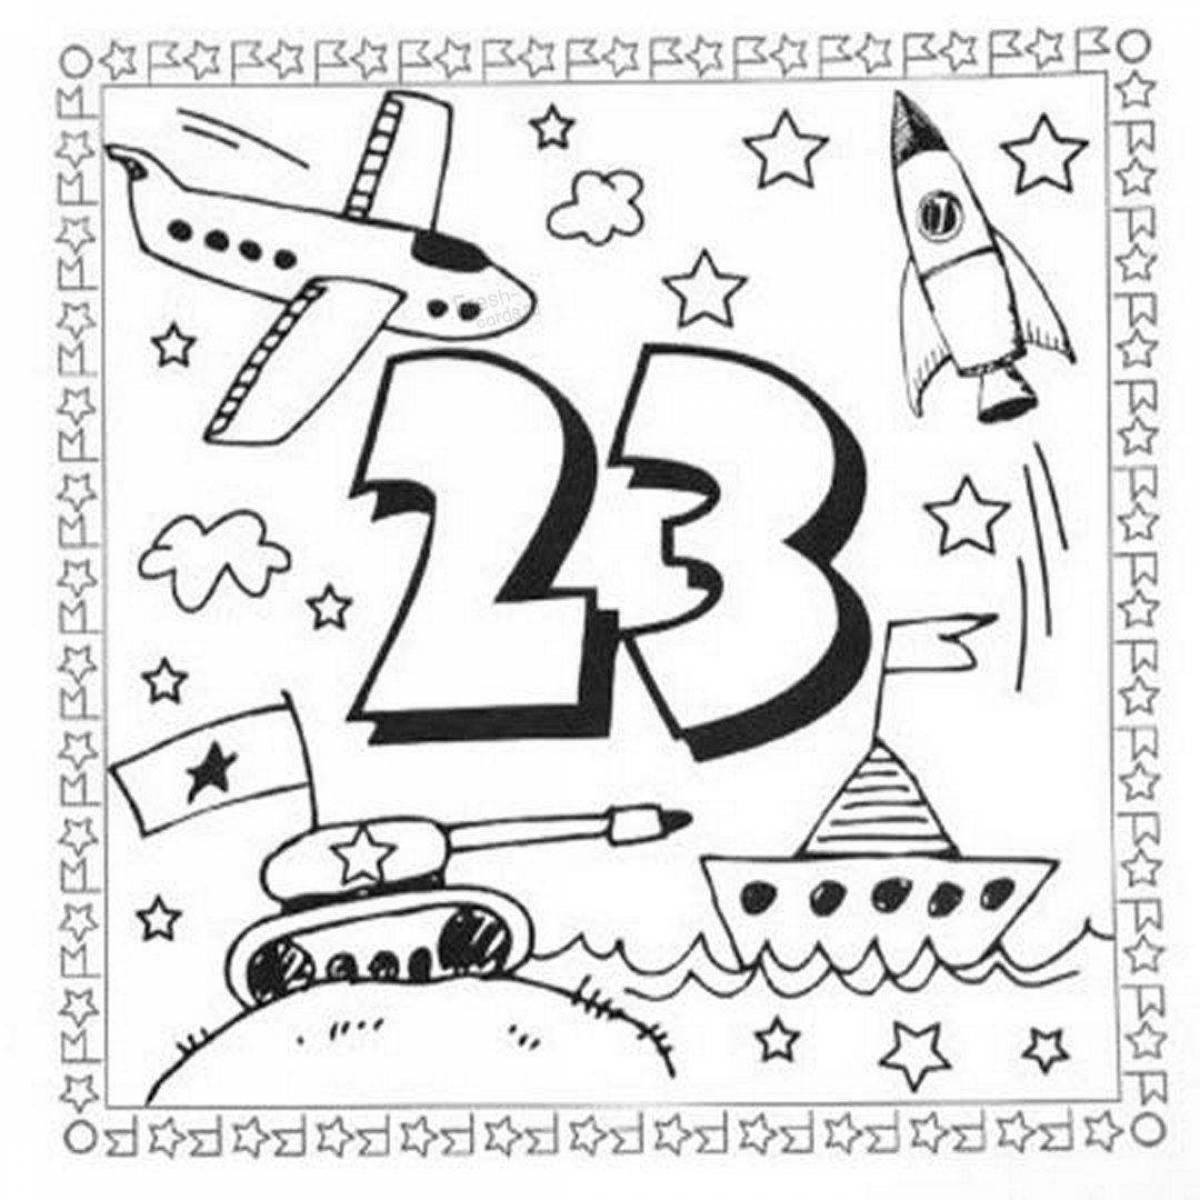 February 23 funny school theme coloring page